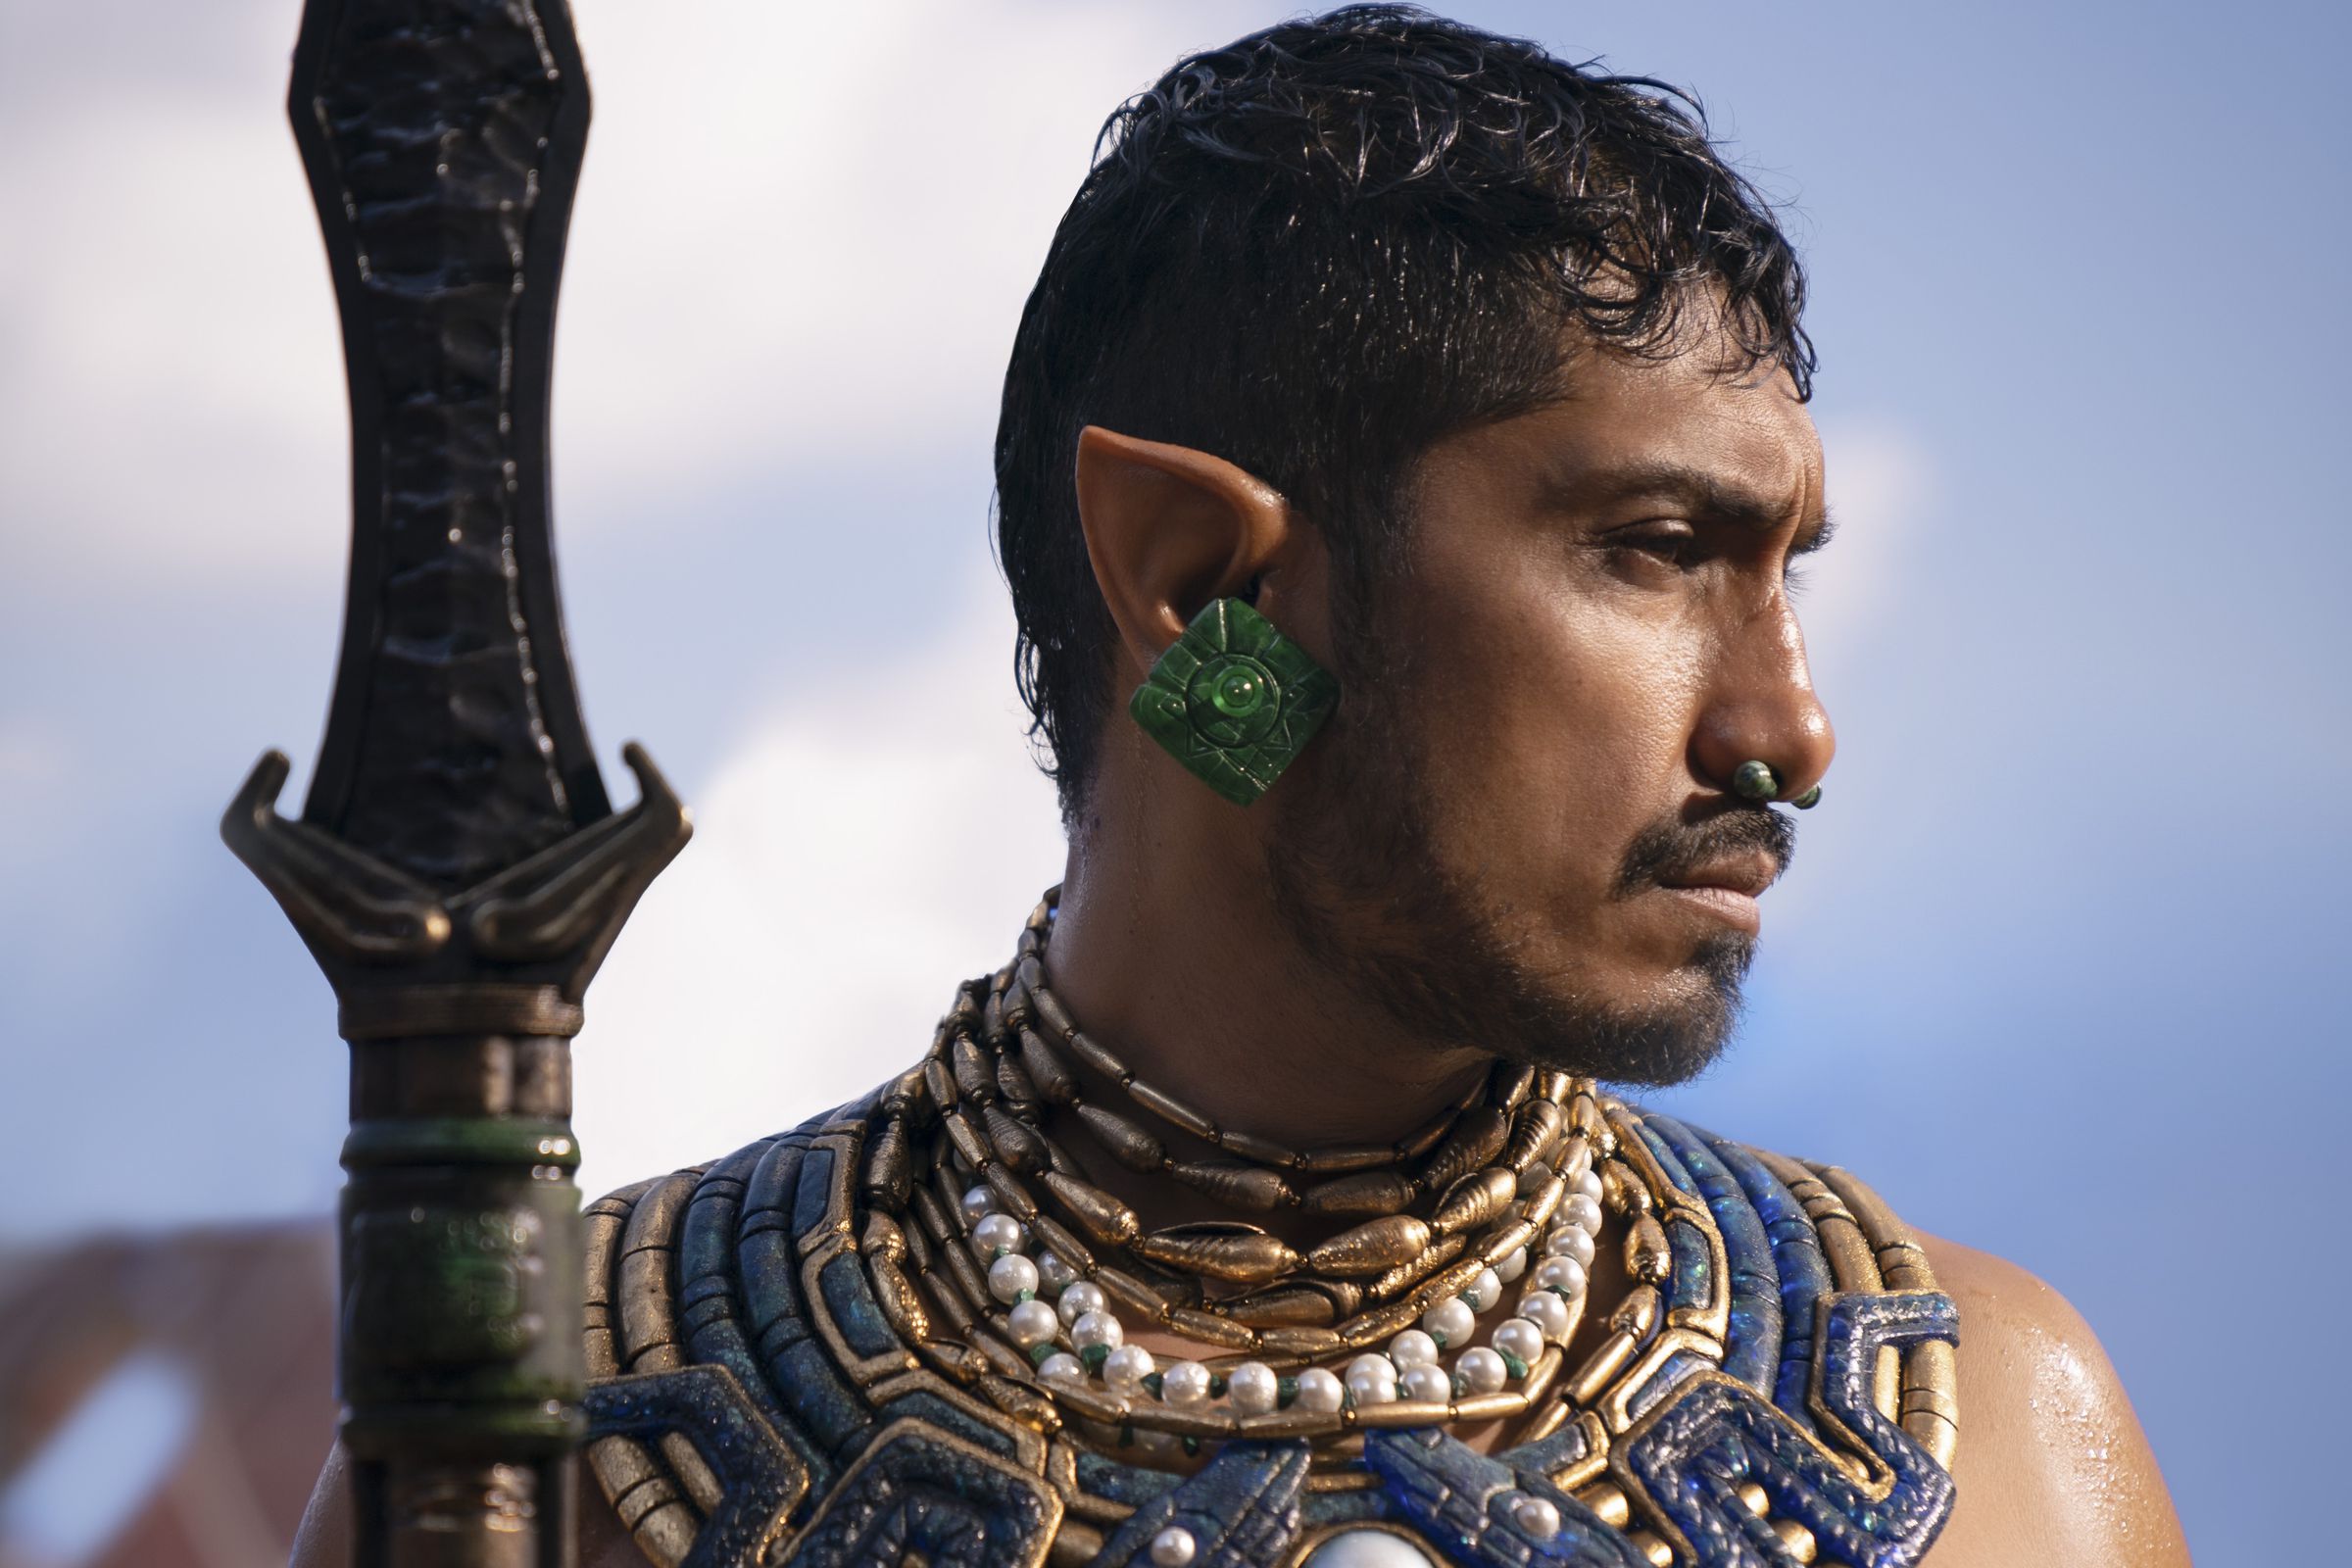 A tight profile shot of a man with pointed ears who is wearing many necklaces featuring intricate beadwork that form a wide collar down his chest. In the foreground is an ornate spear that the man is holding.